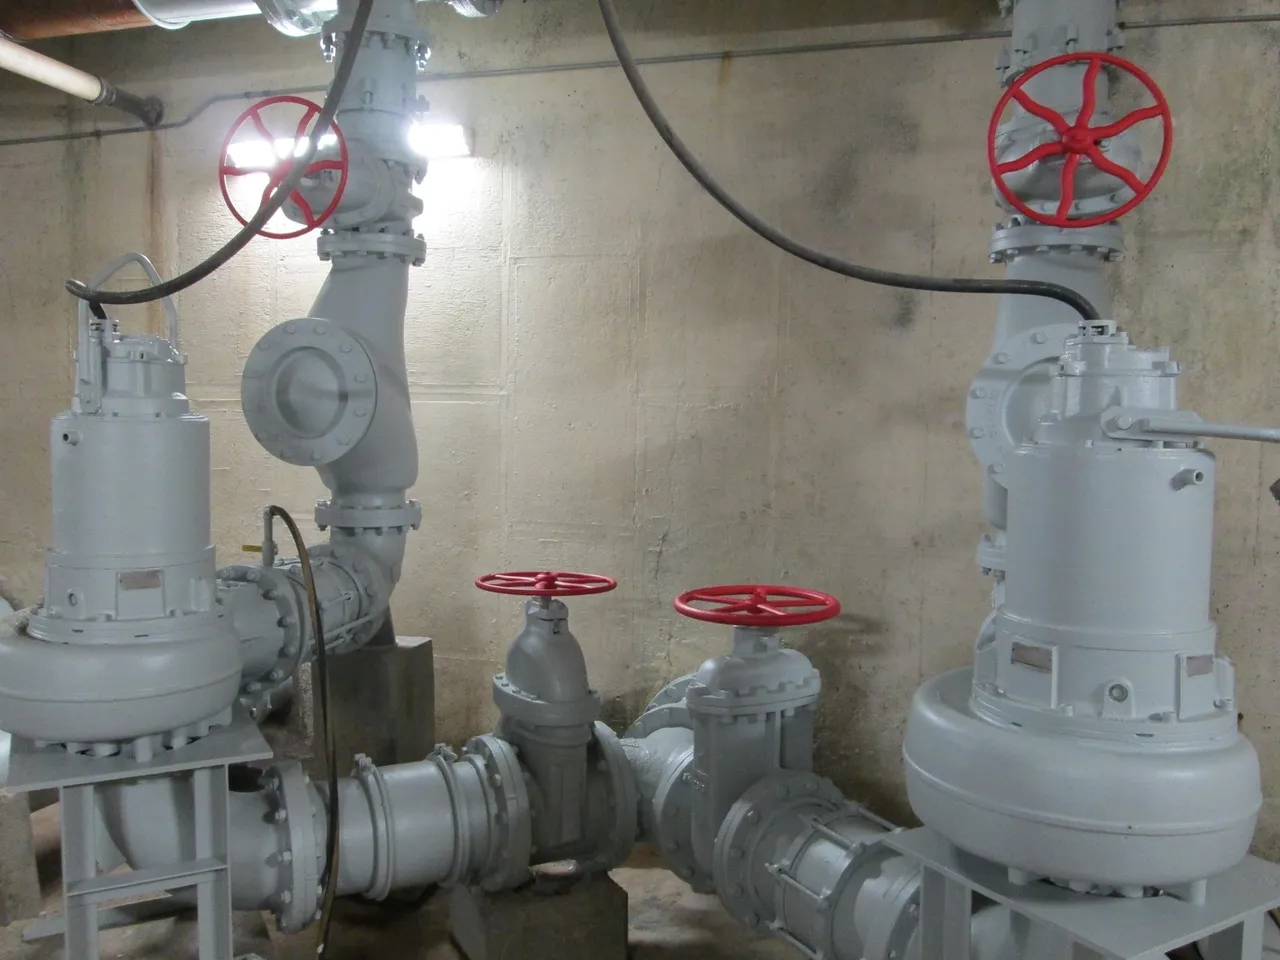 A view of pipes and valves in an industrial setting.